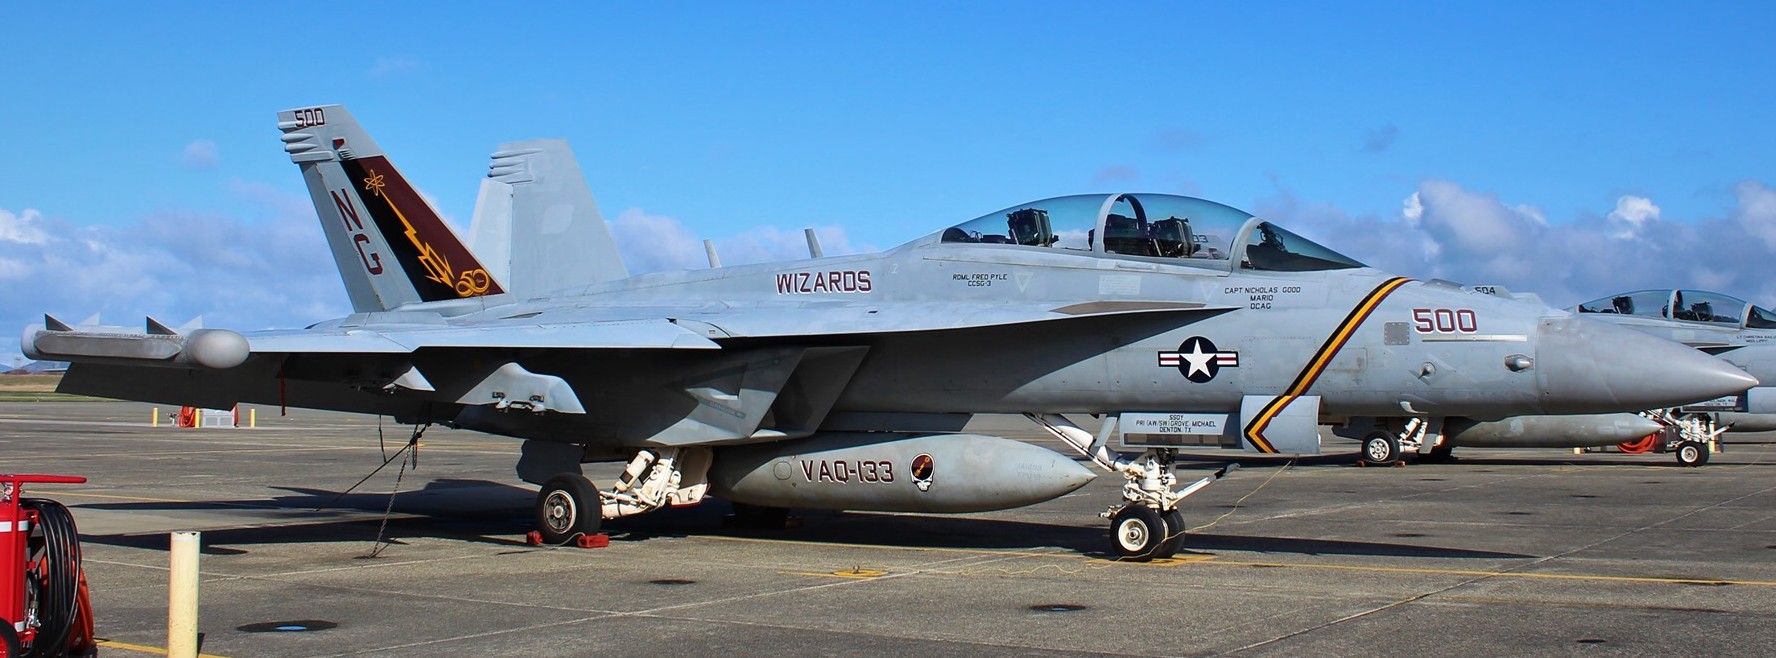 vaq-133 wizards electronic attack squadron vaqron us navy boeing ea-18g growler nas whidbey island 69